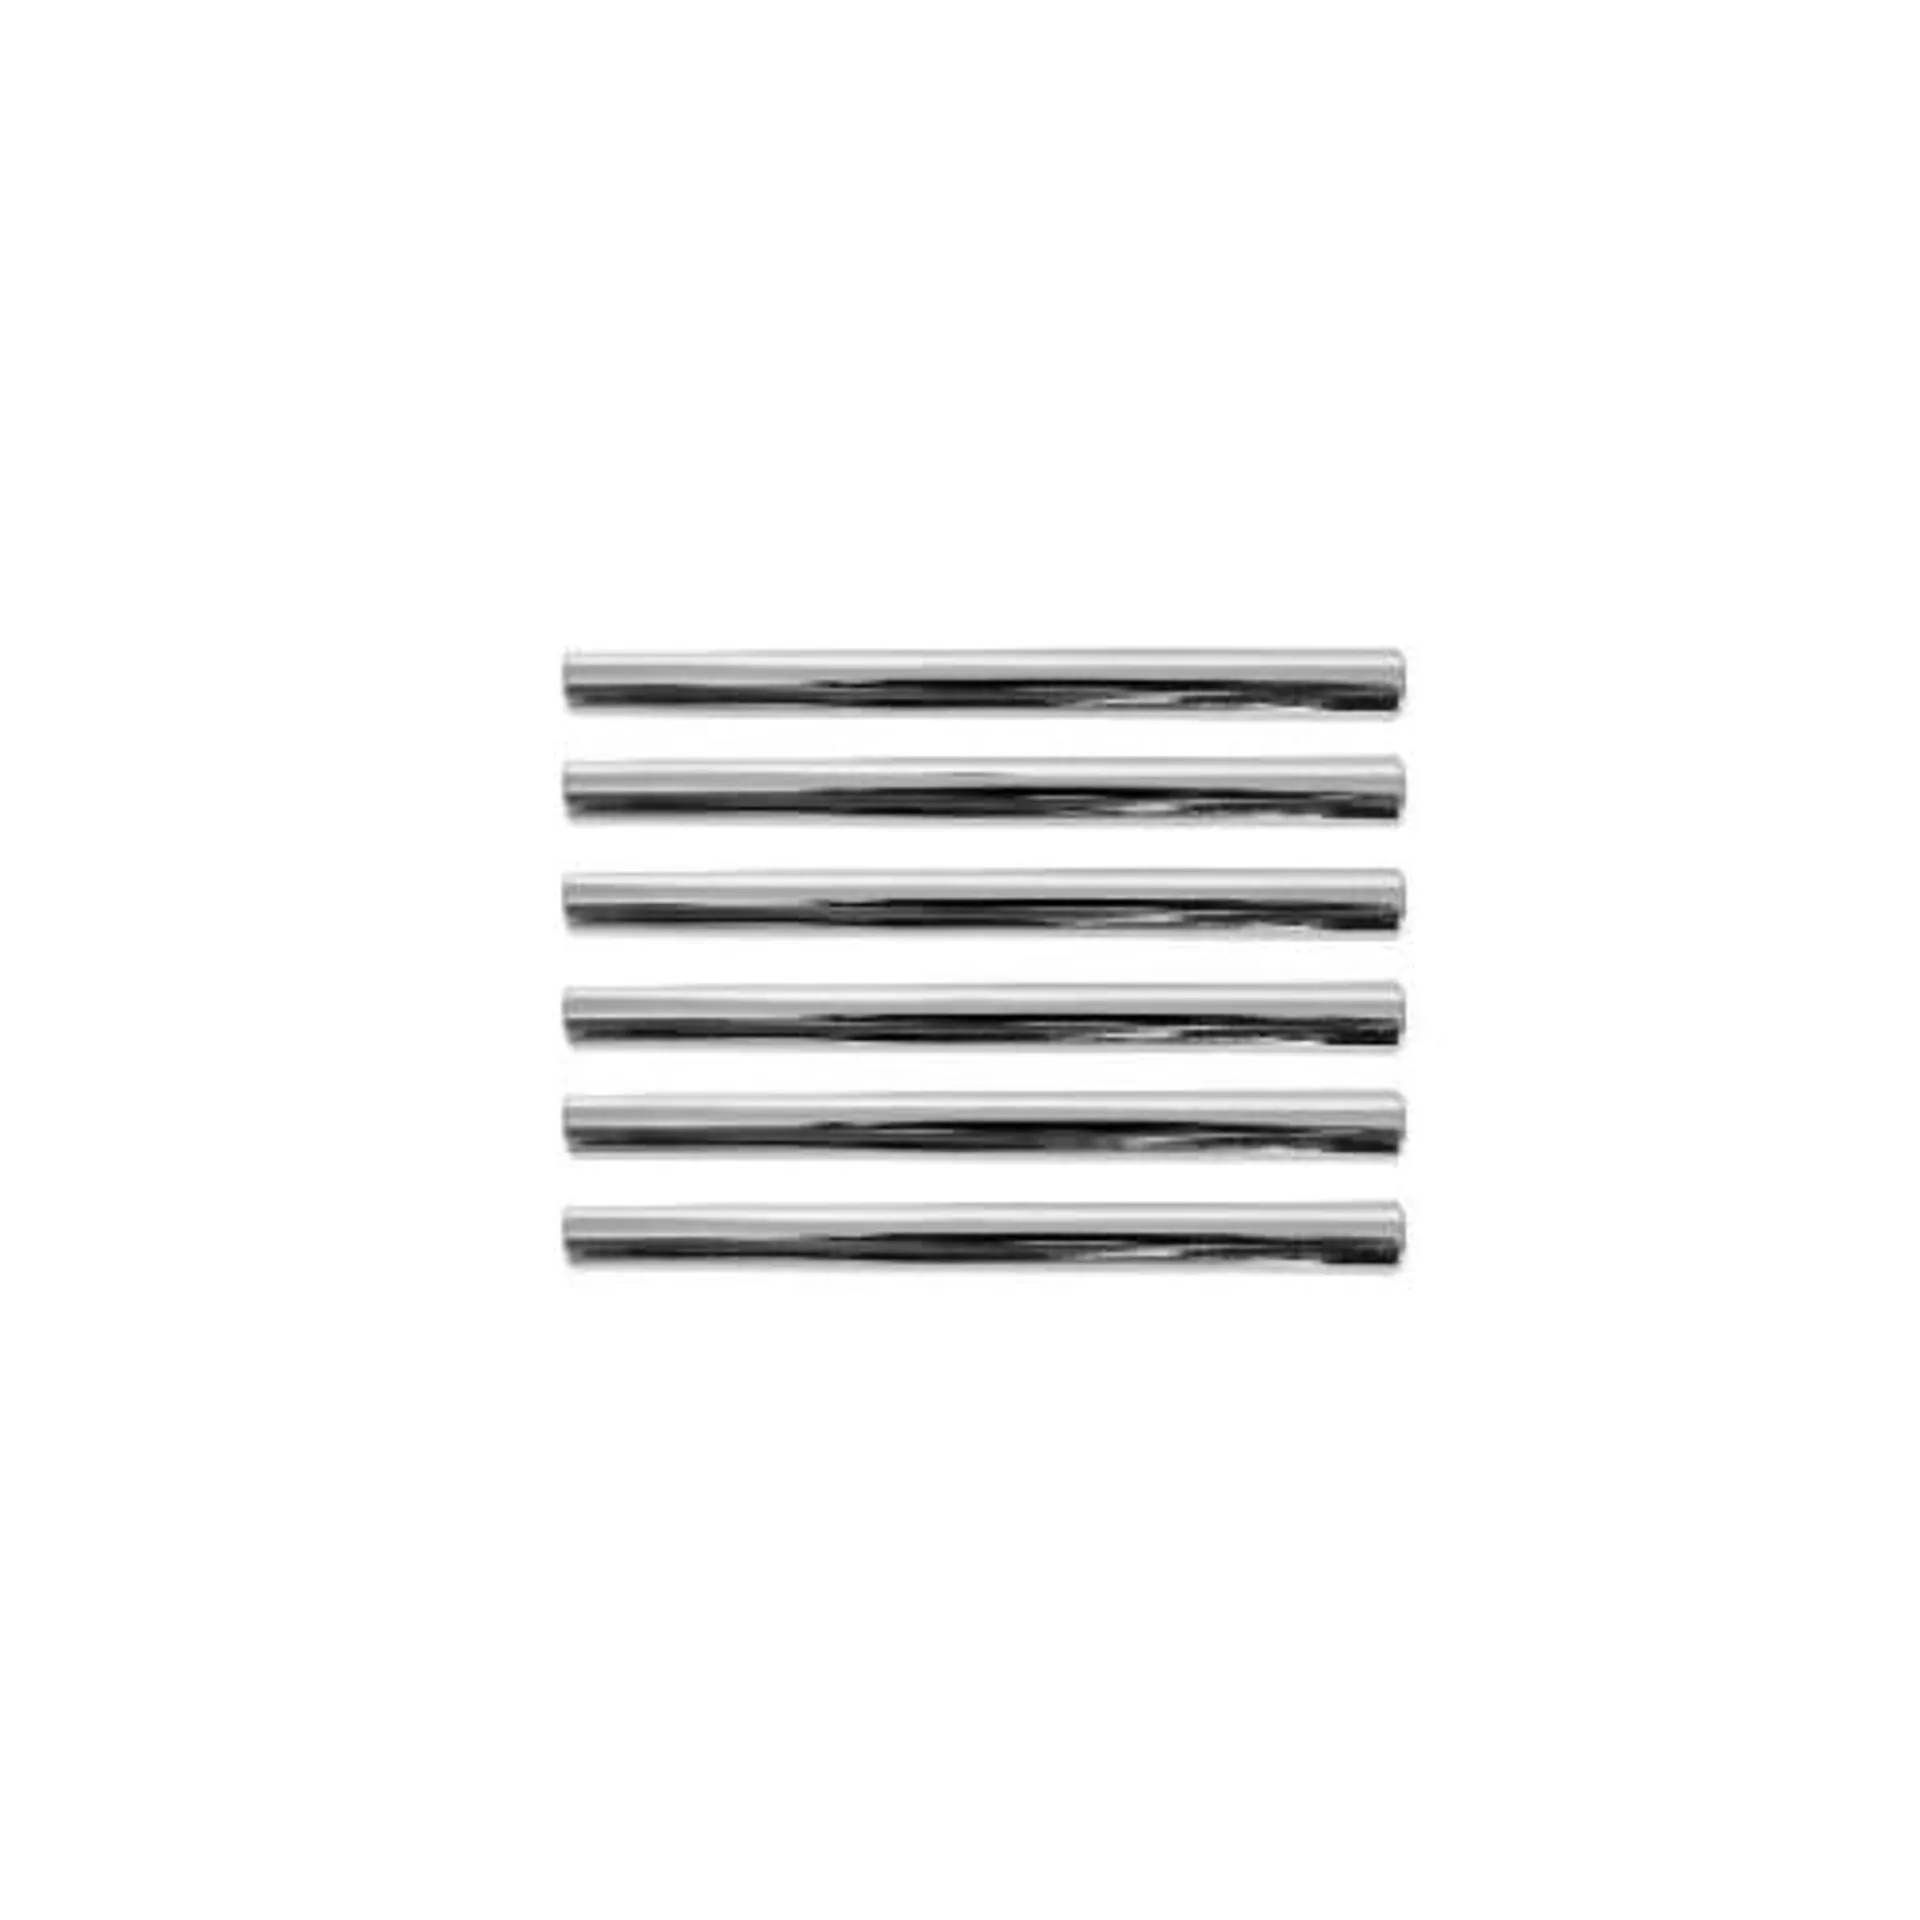 Wickes T Bar Door Handle - Polished Chrome 135mm Pack of 6